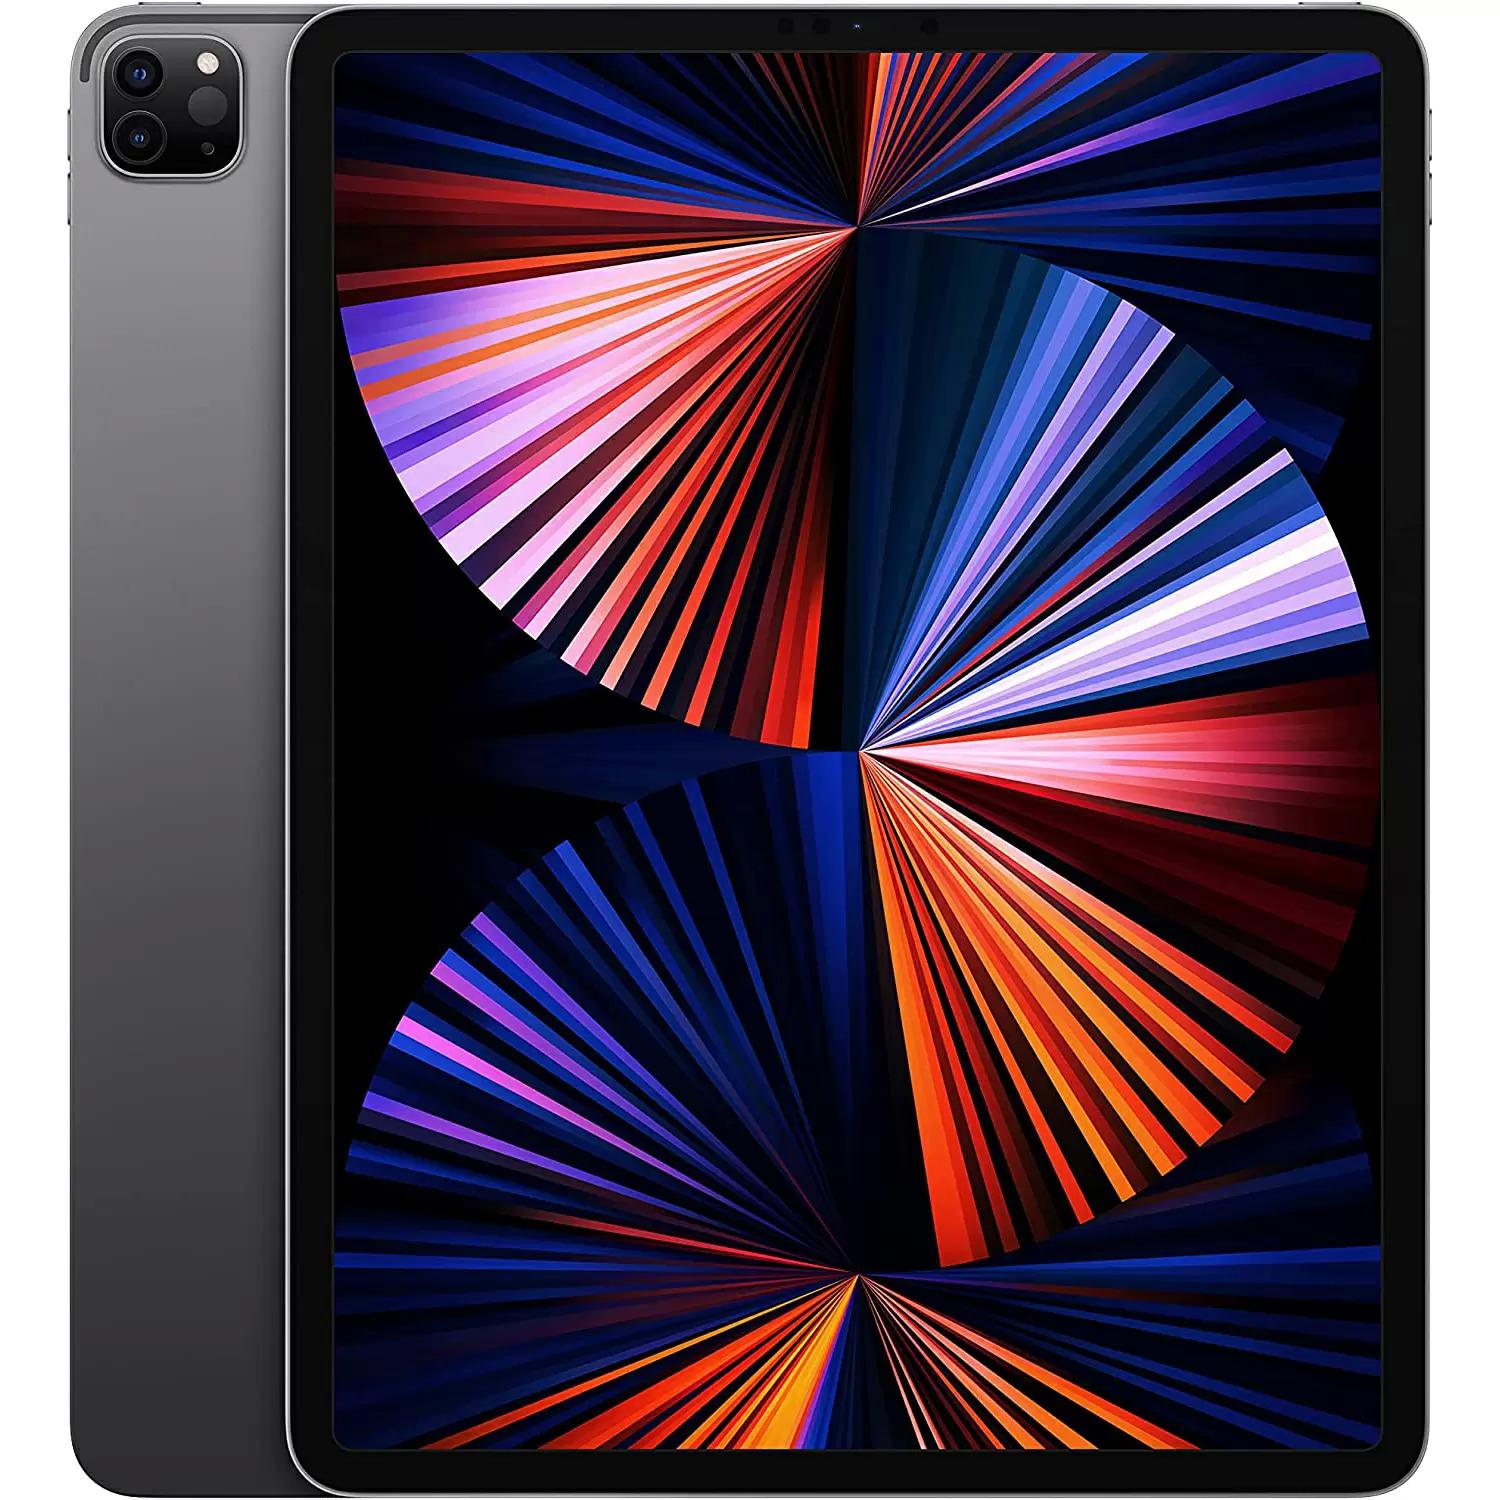 128GB Apple 12.9in iPad Pro Wifi Tablet for $899.99 Shipped